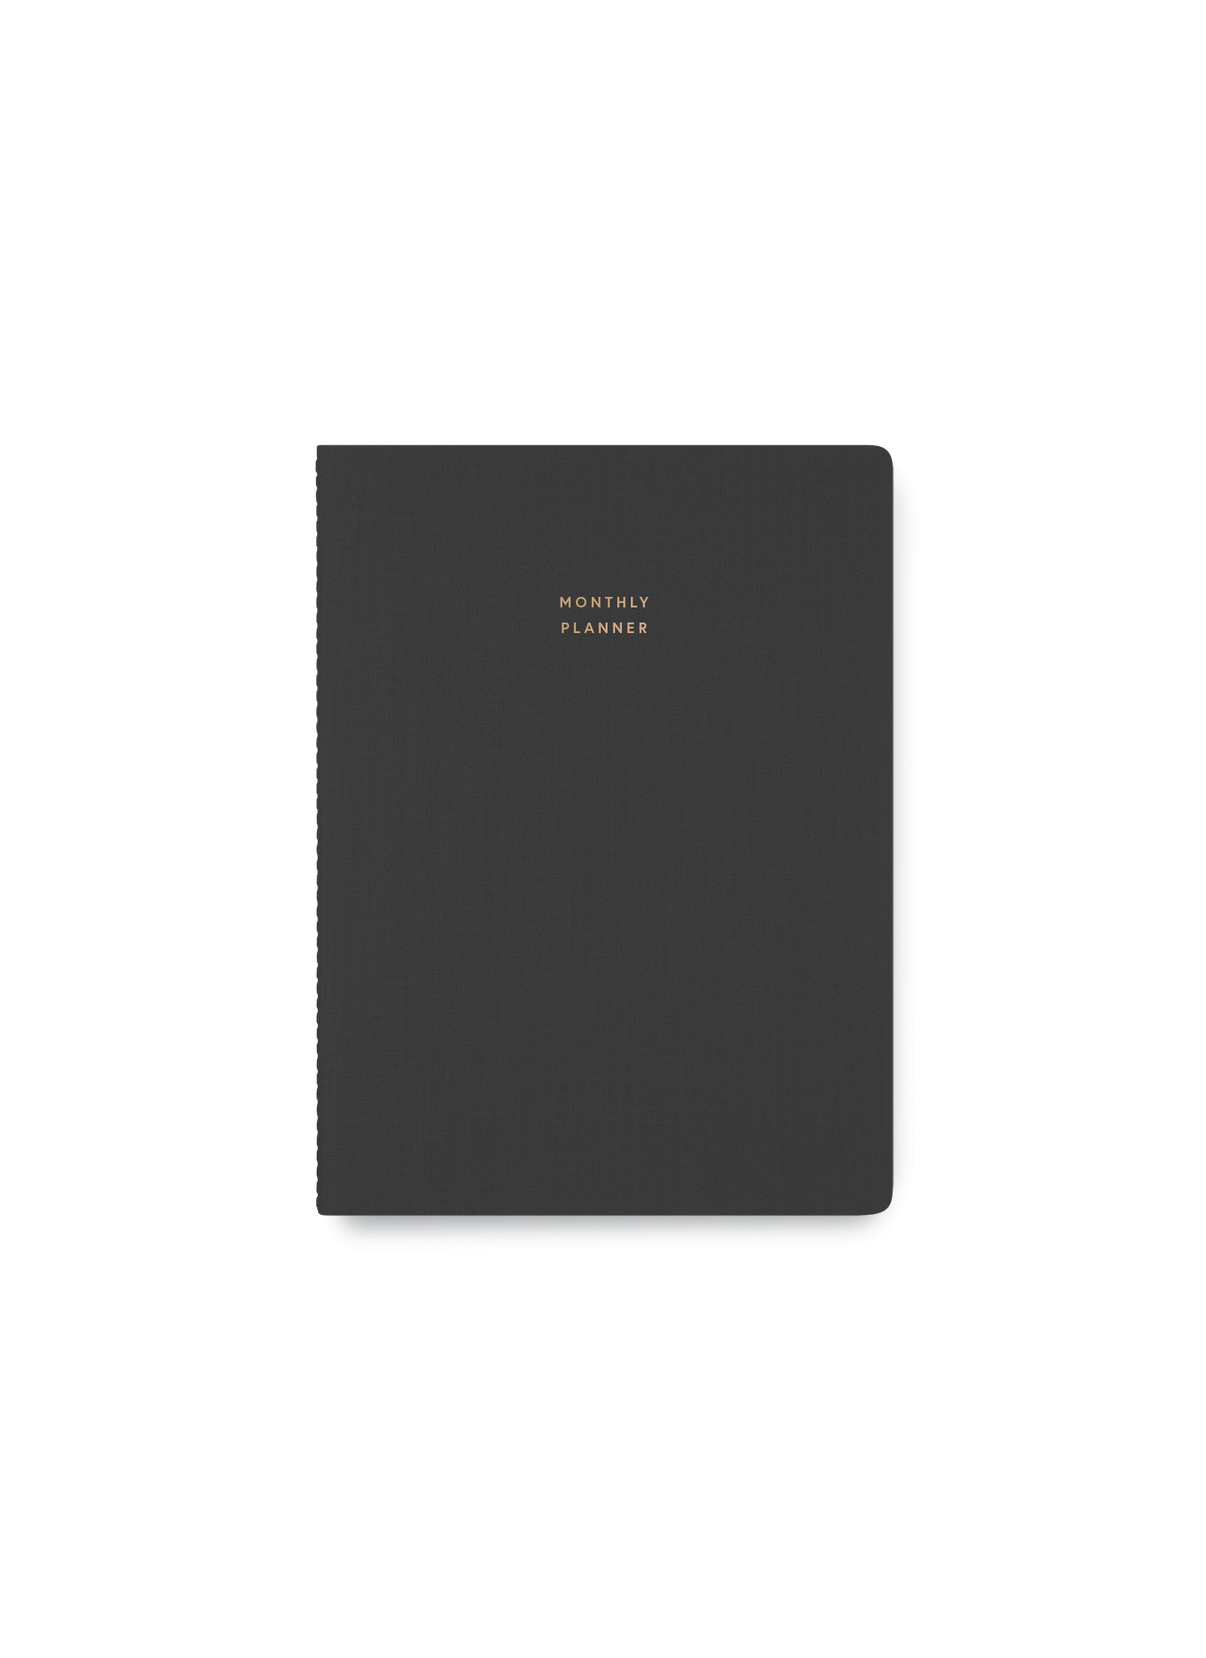 Appointed undated Monthly Planner in Charcoal Gray bookcloth with smyth-sewn binding front view || Charcoal Gray